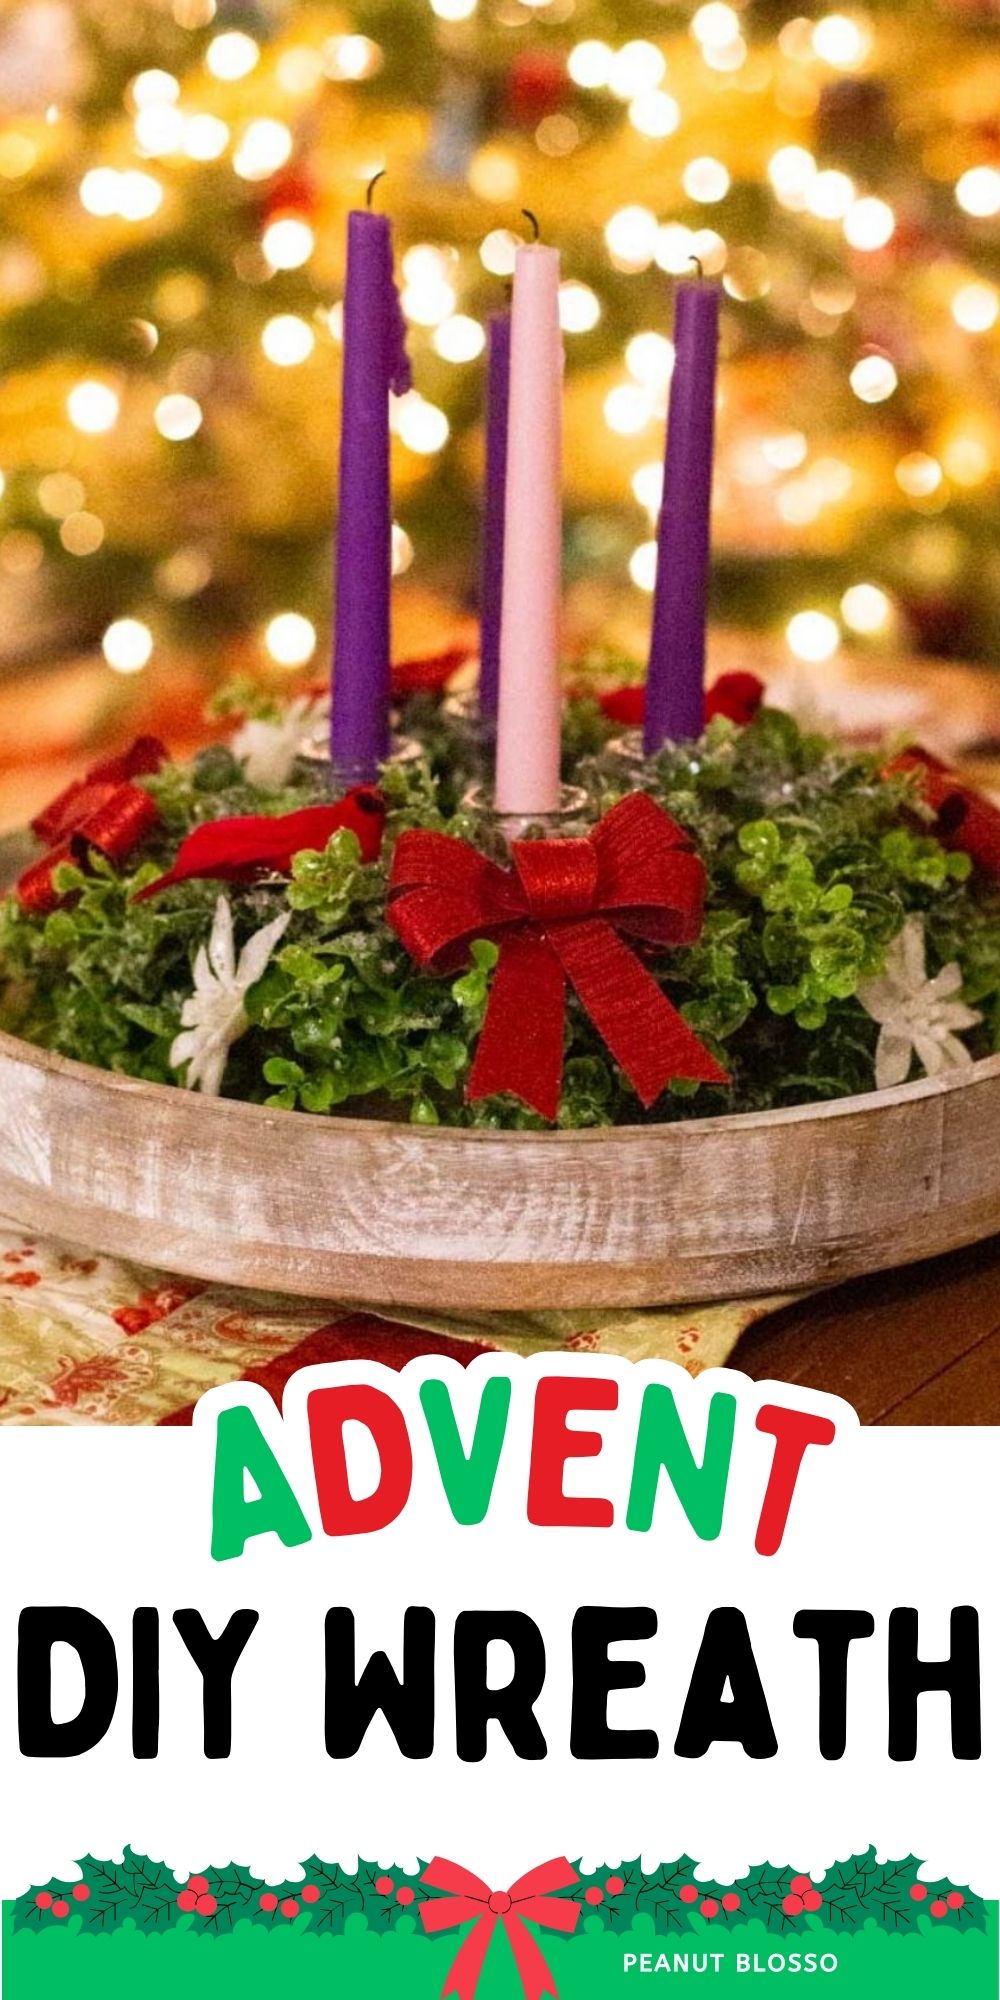 A 4-candle Advent wreath sits on the table.